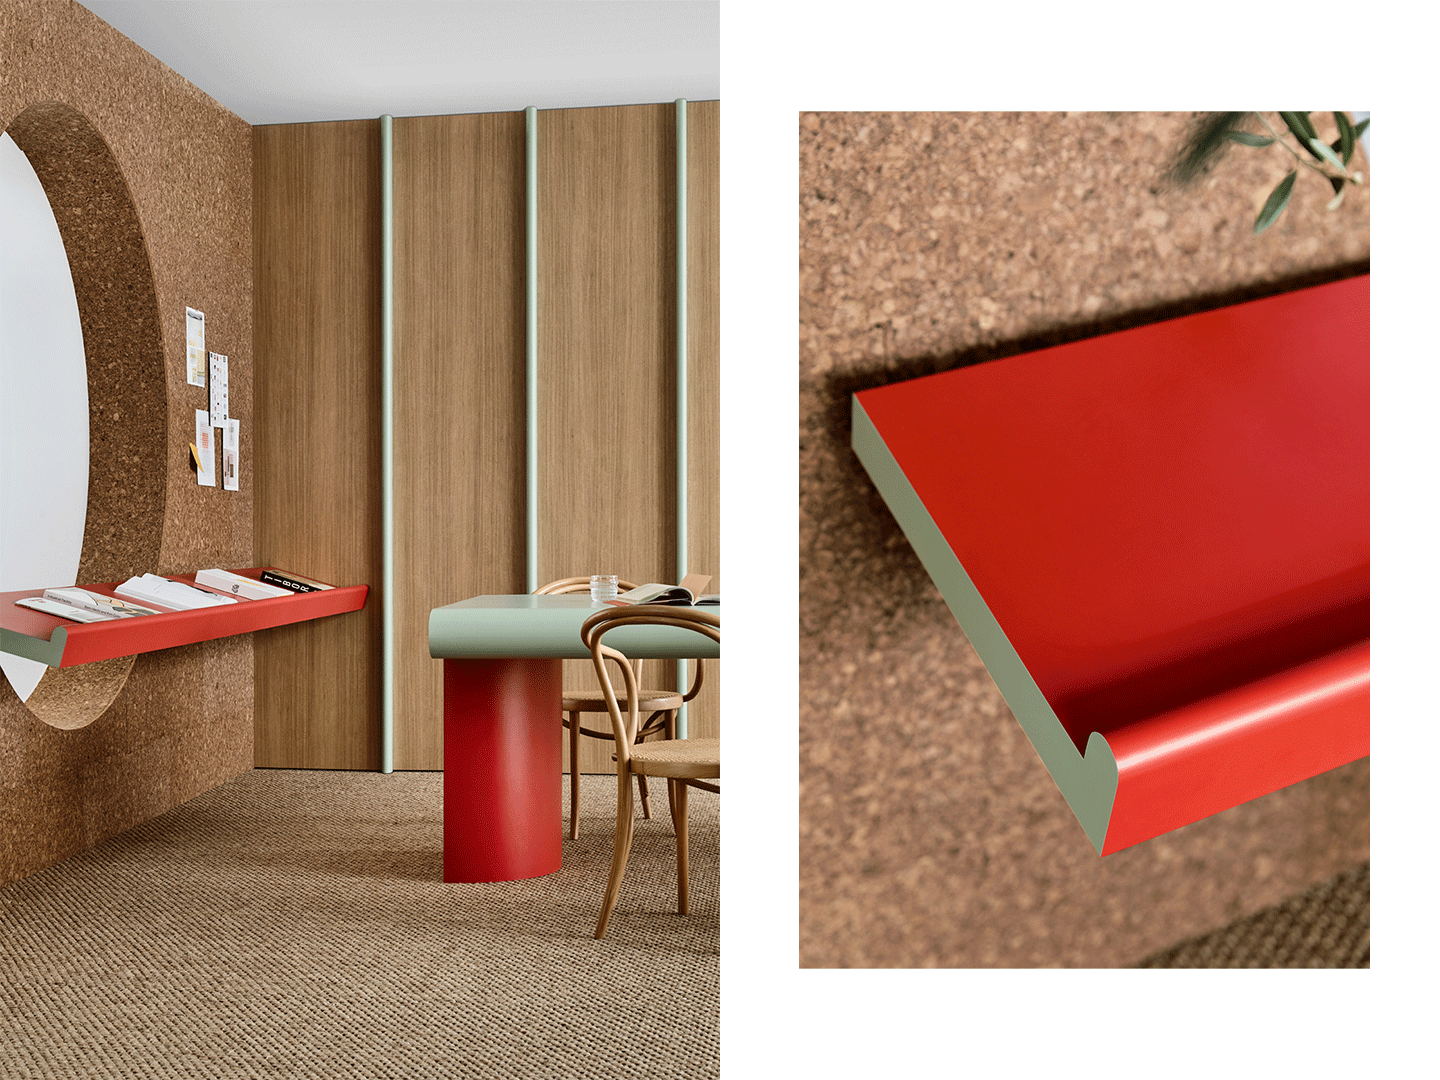 'Workplace' by Kennedy Nolan for Laminex